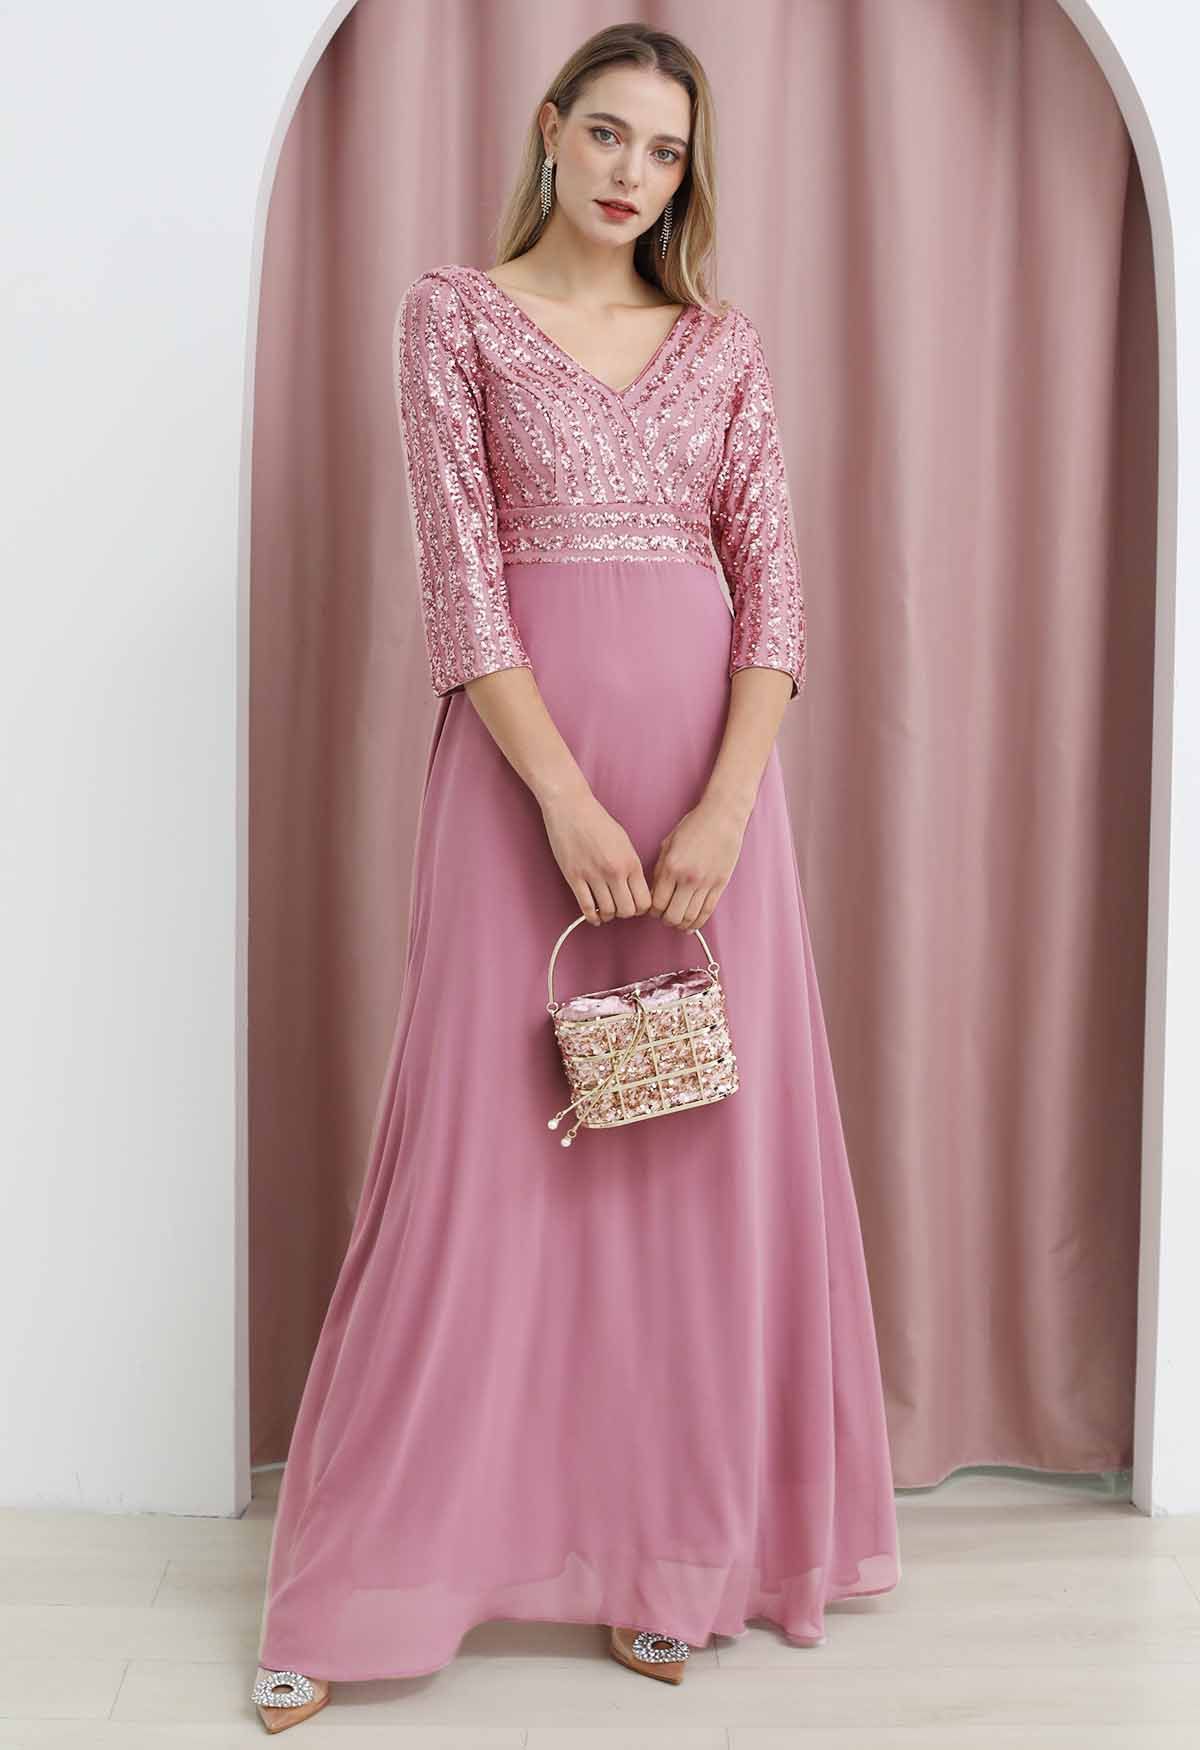 Exquisite Sequin V-Neck Chiffon Maxi Gown in Dusty Pink